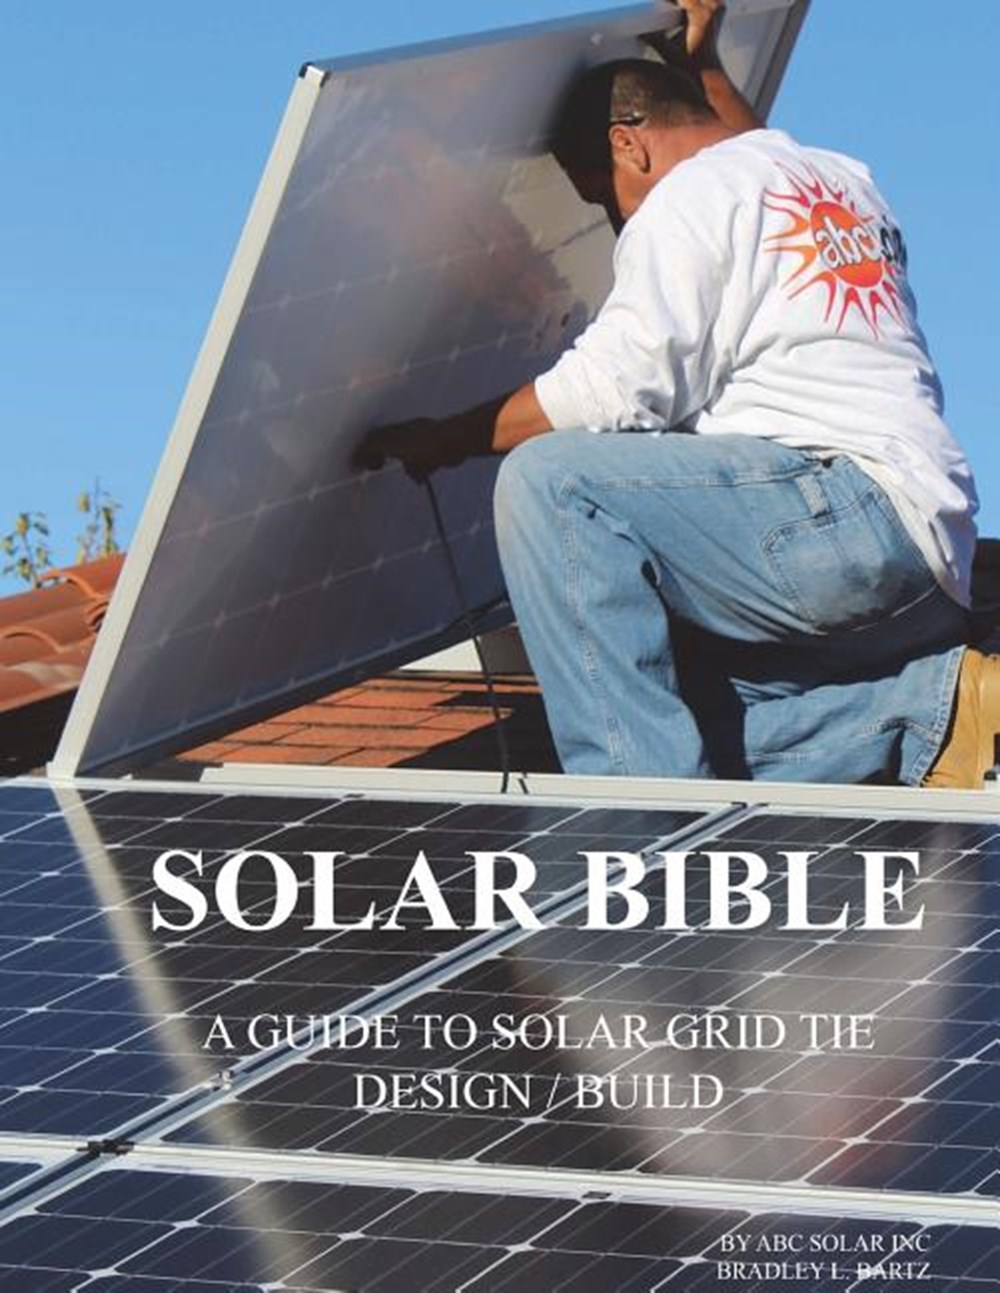 Solar Bible Guide to Design / Build Solar Electric Grid Tie Systems